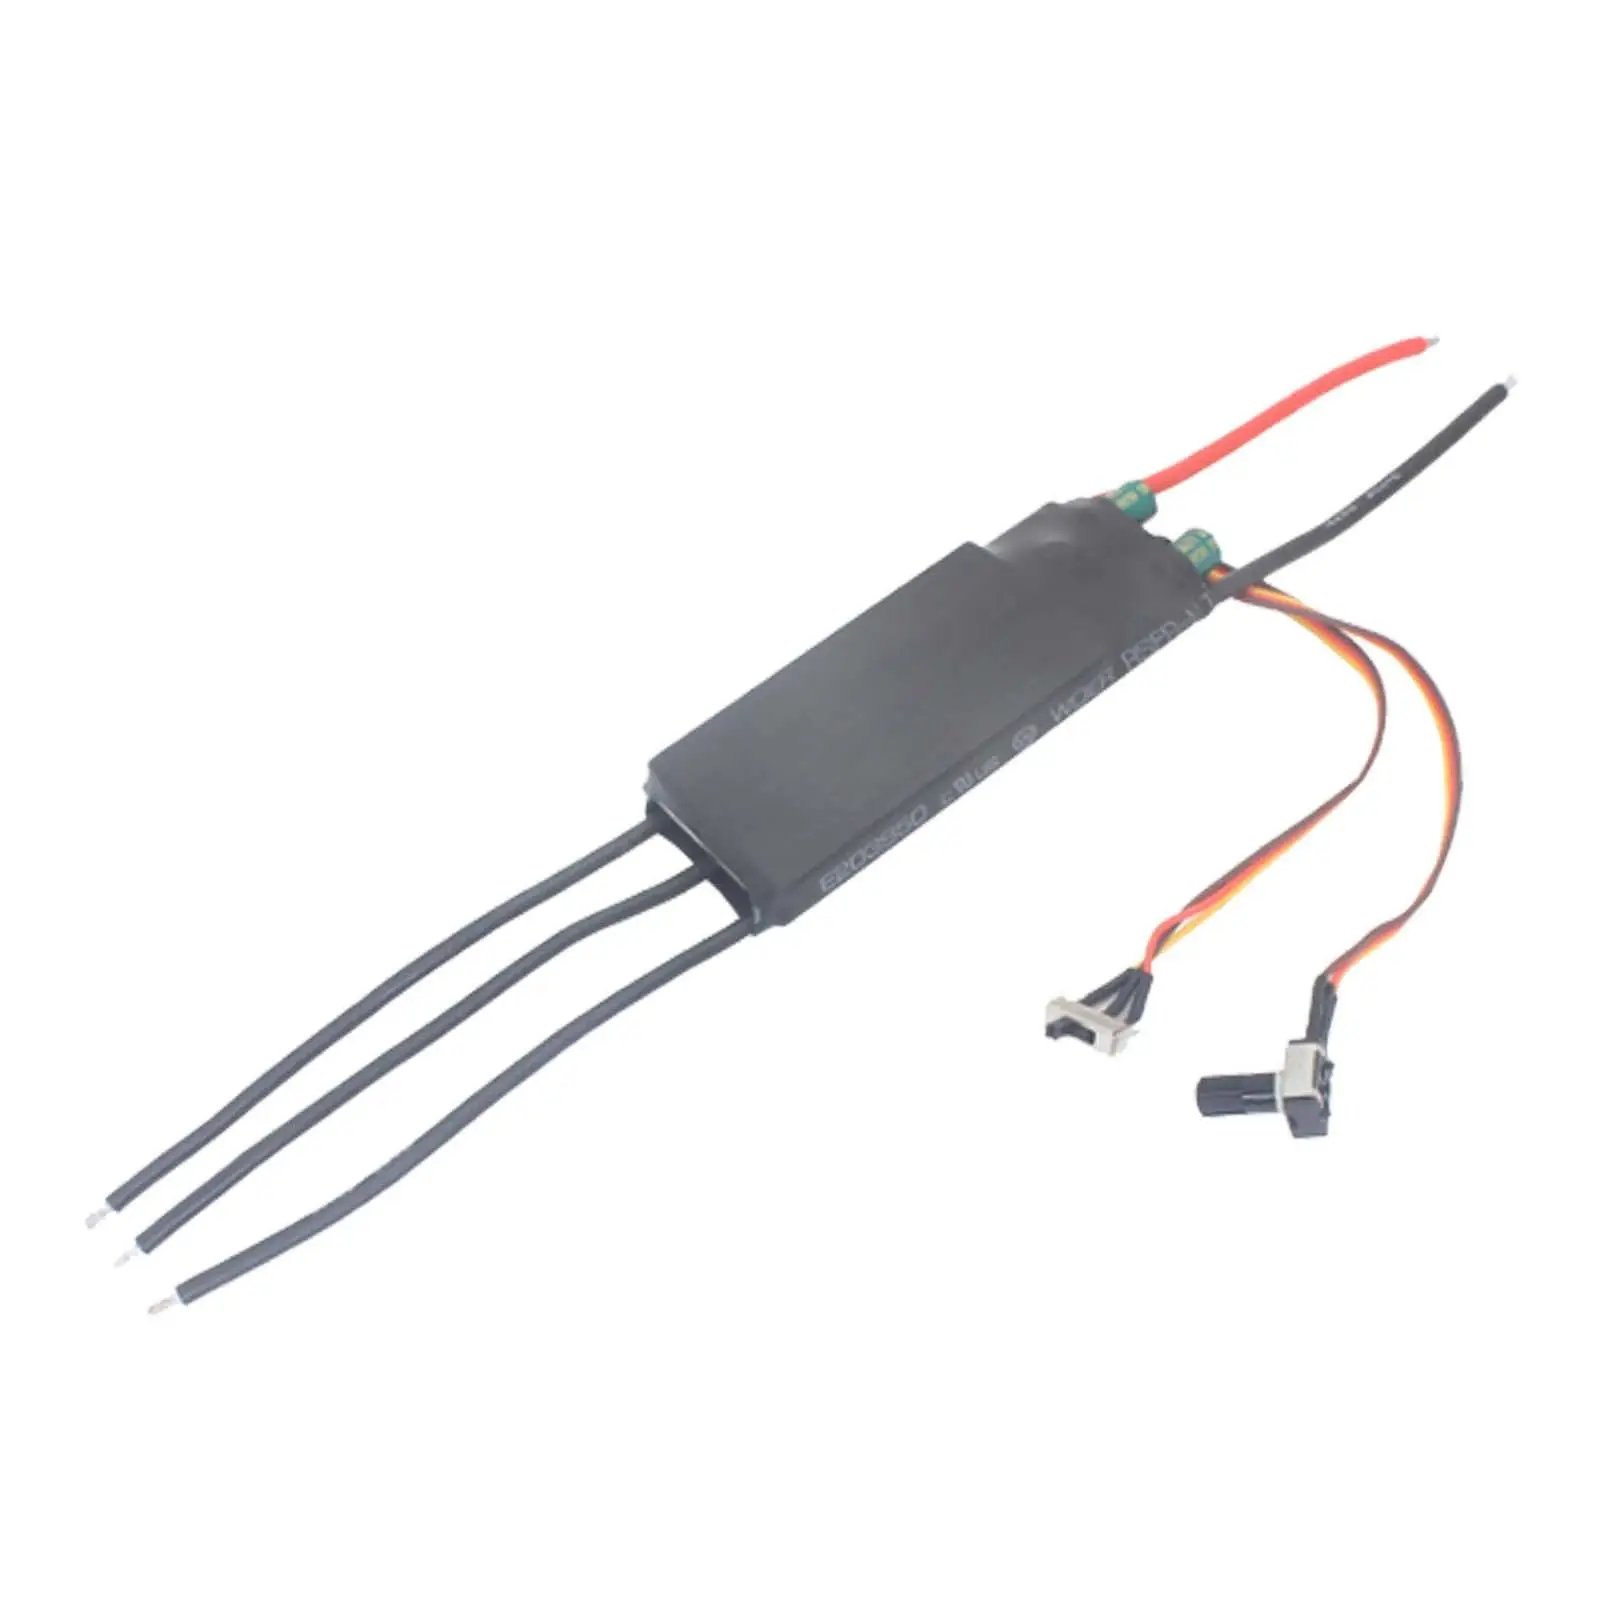 DC Motor Speed Controller with Potentiometer with Overload Protector Compact Size Brushless Hallless Motor for Fan Accessories